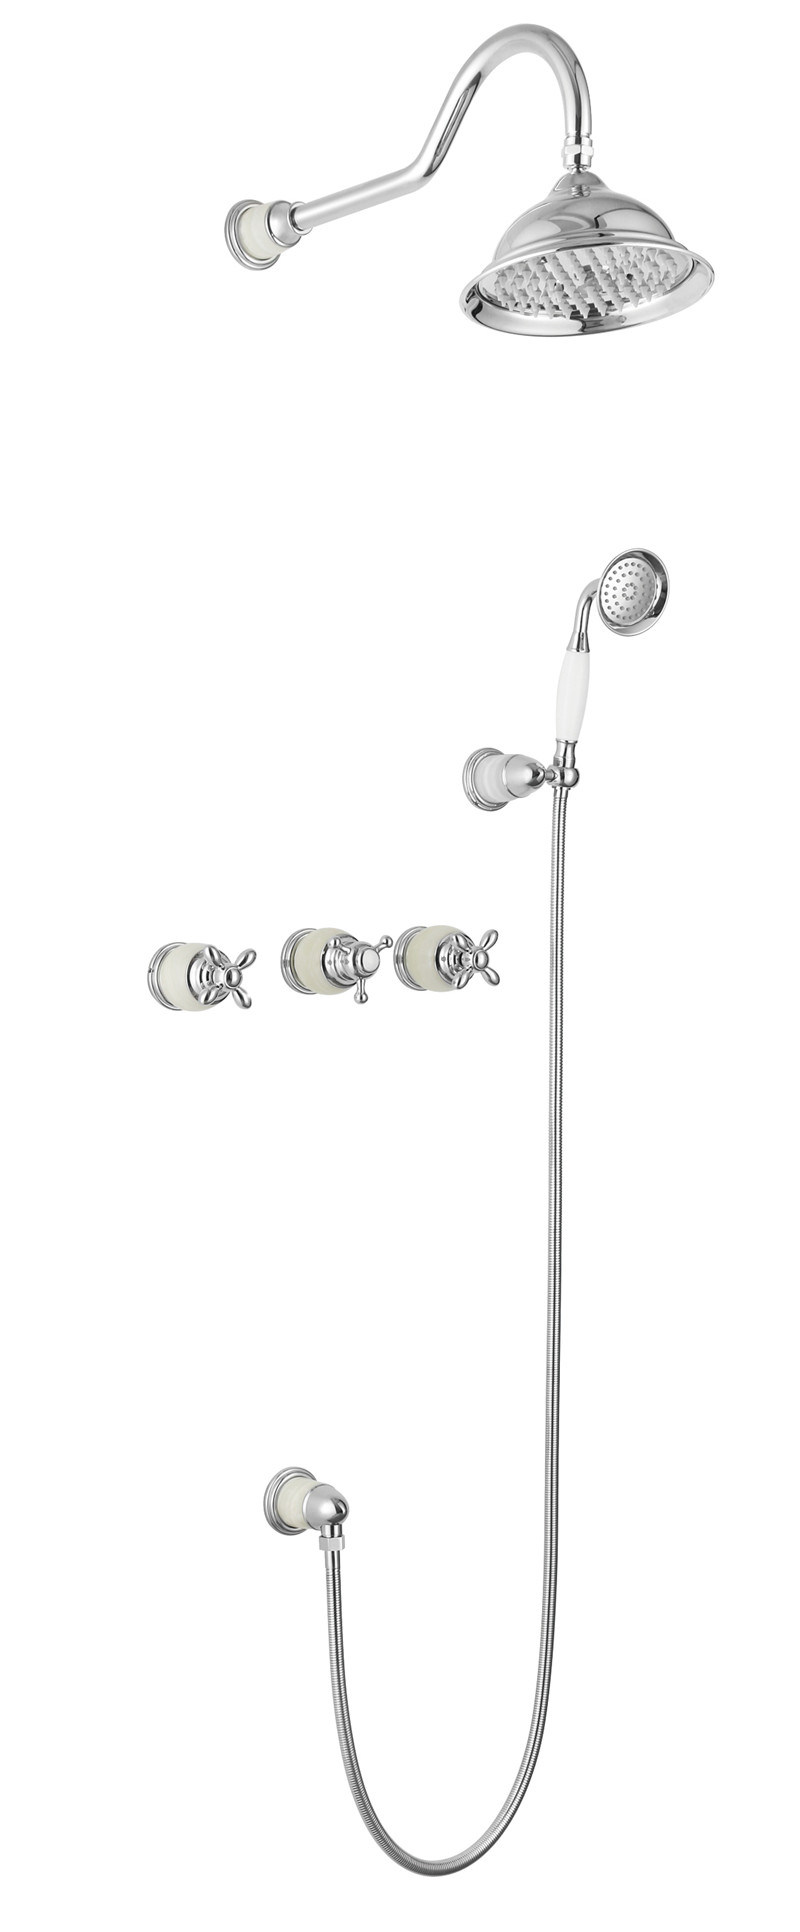 Wall Mounted Antique Brass Concealed Shower Set (zf-W77)